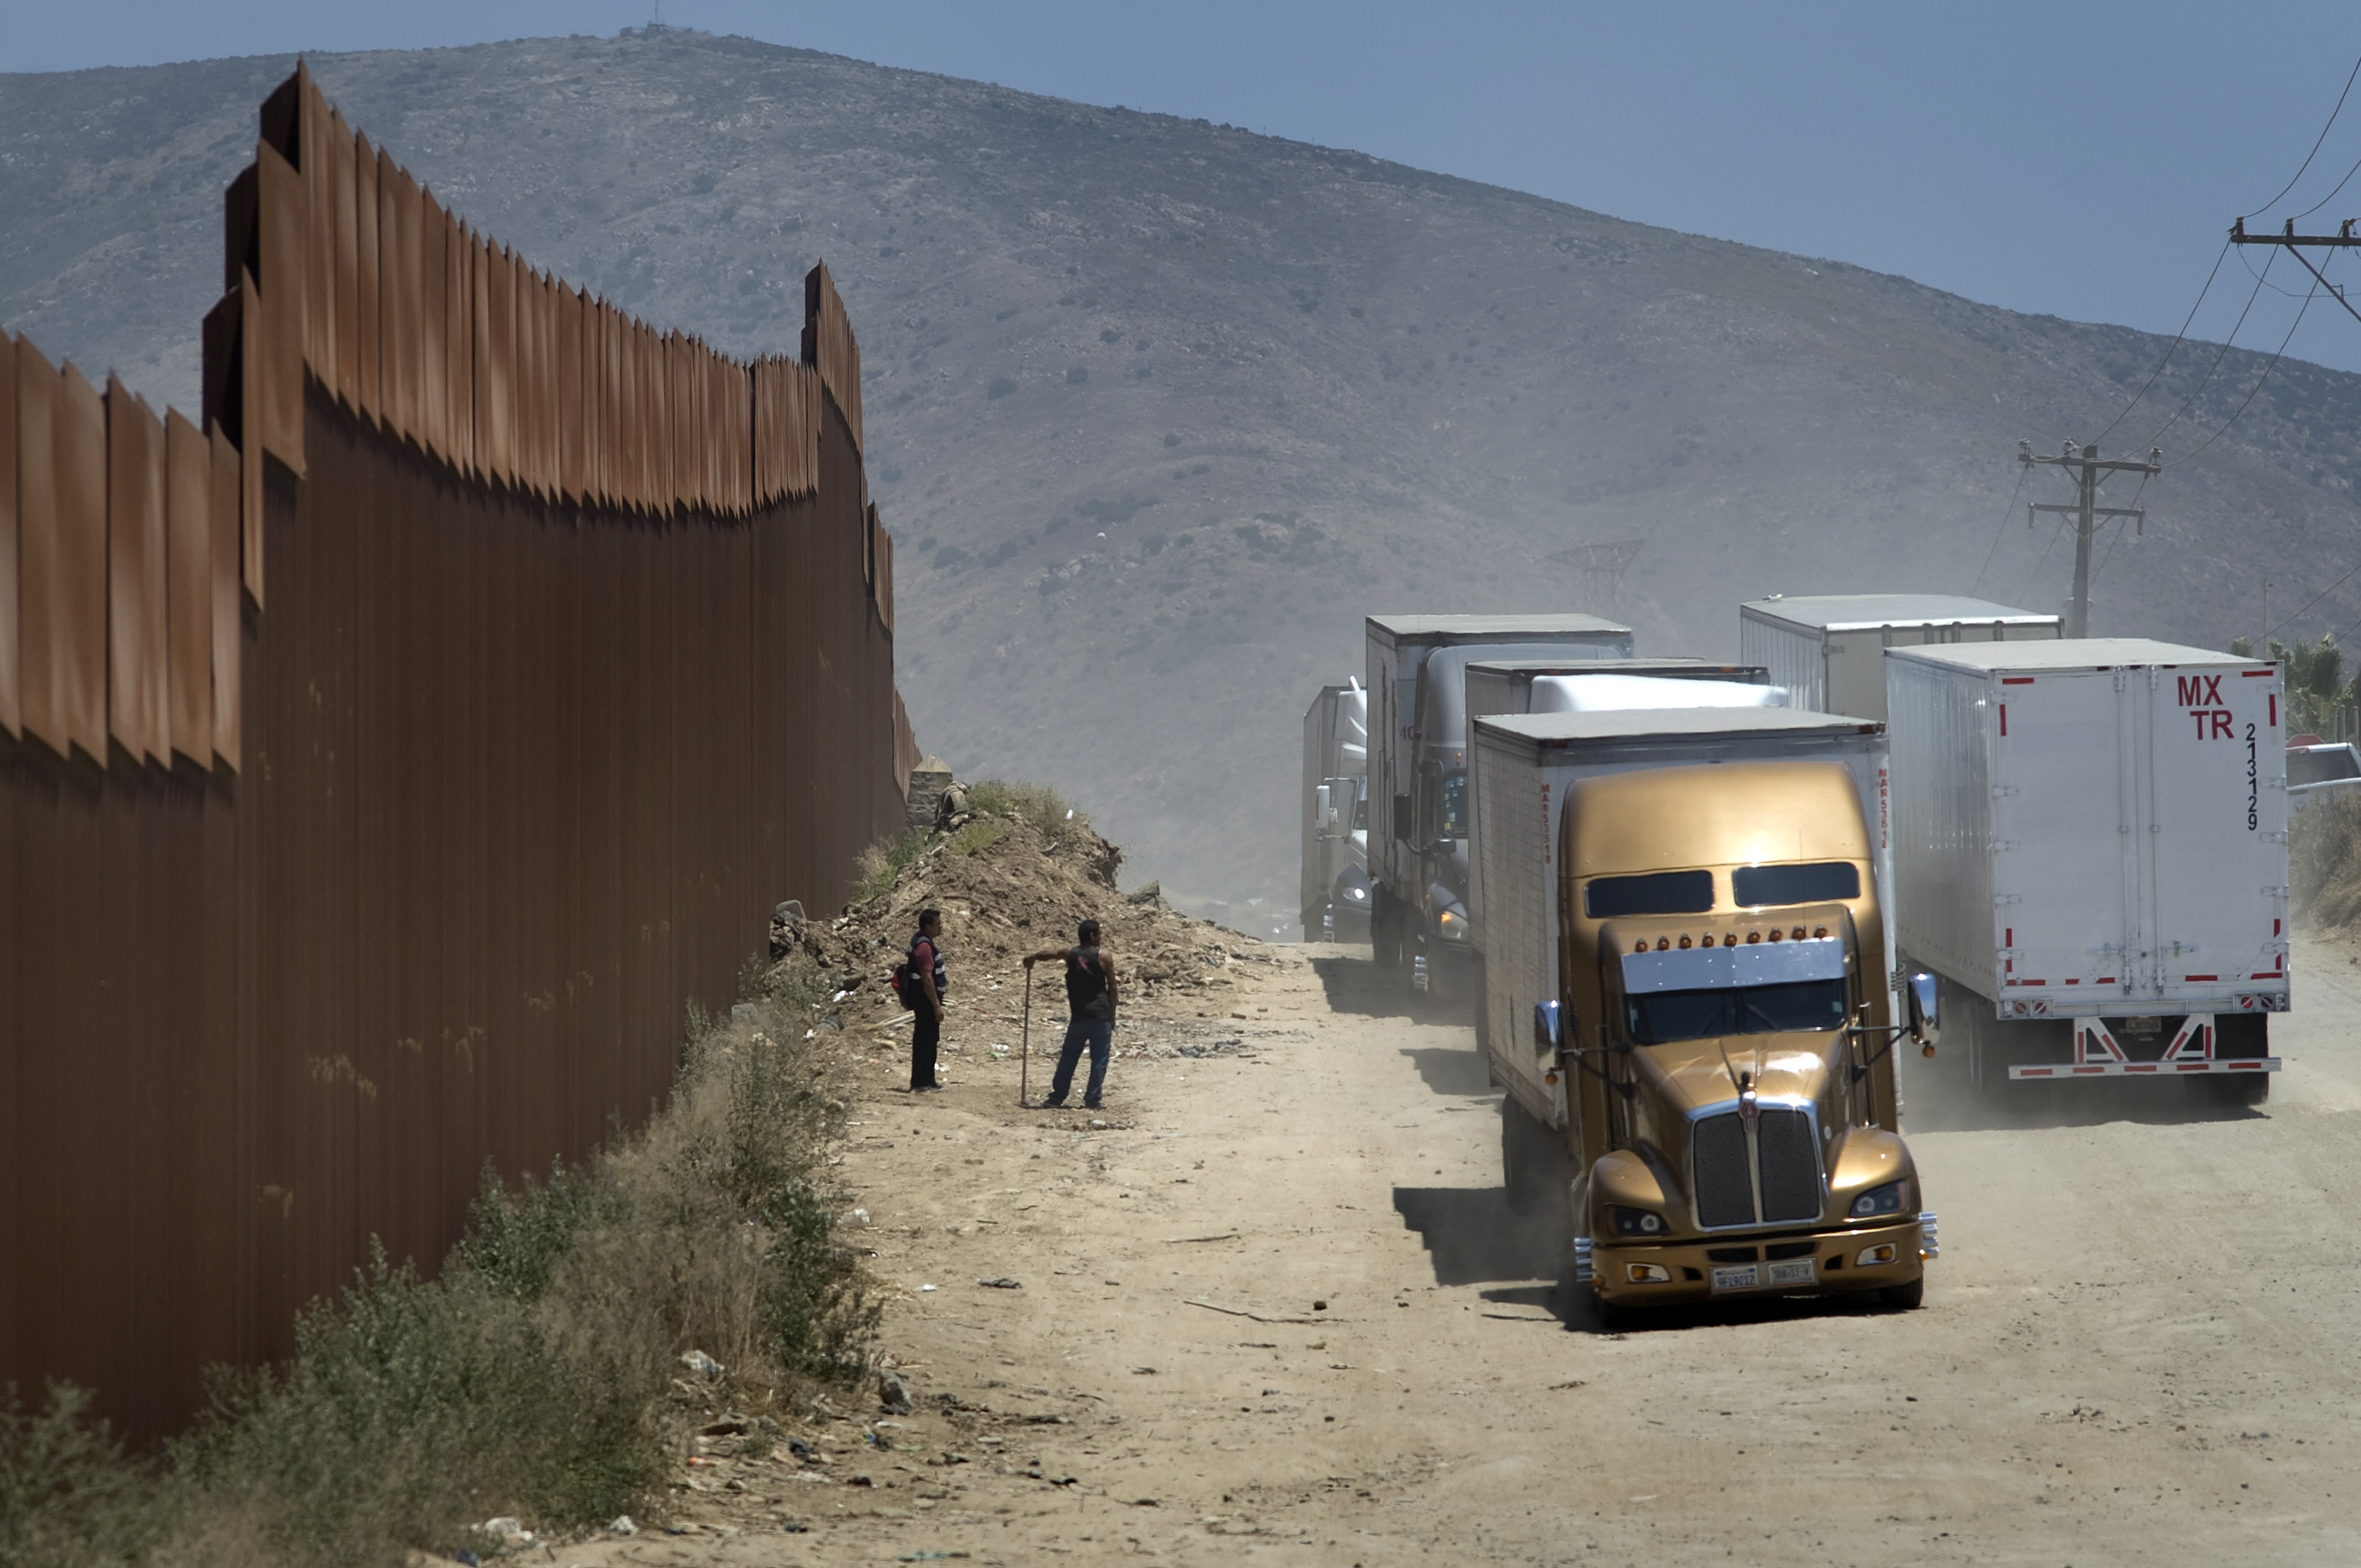 epa07626208 Two men who are fixing the road in exchange for tips watch as trucks drive along a dirt road next to the U.S.-Mexico border fence toward the commercial border inspection stationn in Tijuana, Mexico, on 04 June 2019, following US President Donald J. Trump's decision to impose tariffs on Mexico. The truck will queue in line with several hundred other trucks waiting to cross the border into San Diego, California, USA. US President Donald J. Trump stated he is planning to implement his decision to impose five percent tariffs on goods imported into the US from Mexico, with a five percent increase each month until October, if Mexican officials do not stop undocumented migrants from crossing into the US from the two nation's shared border.  EPA/David Maung